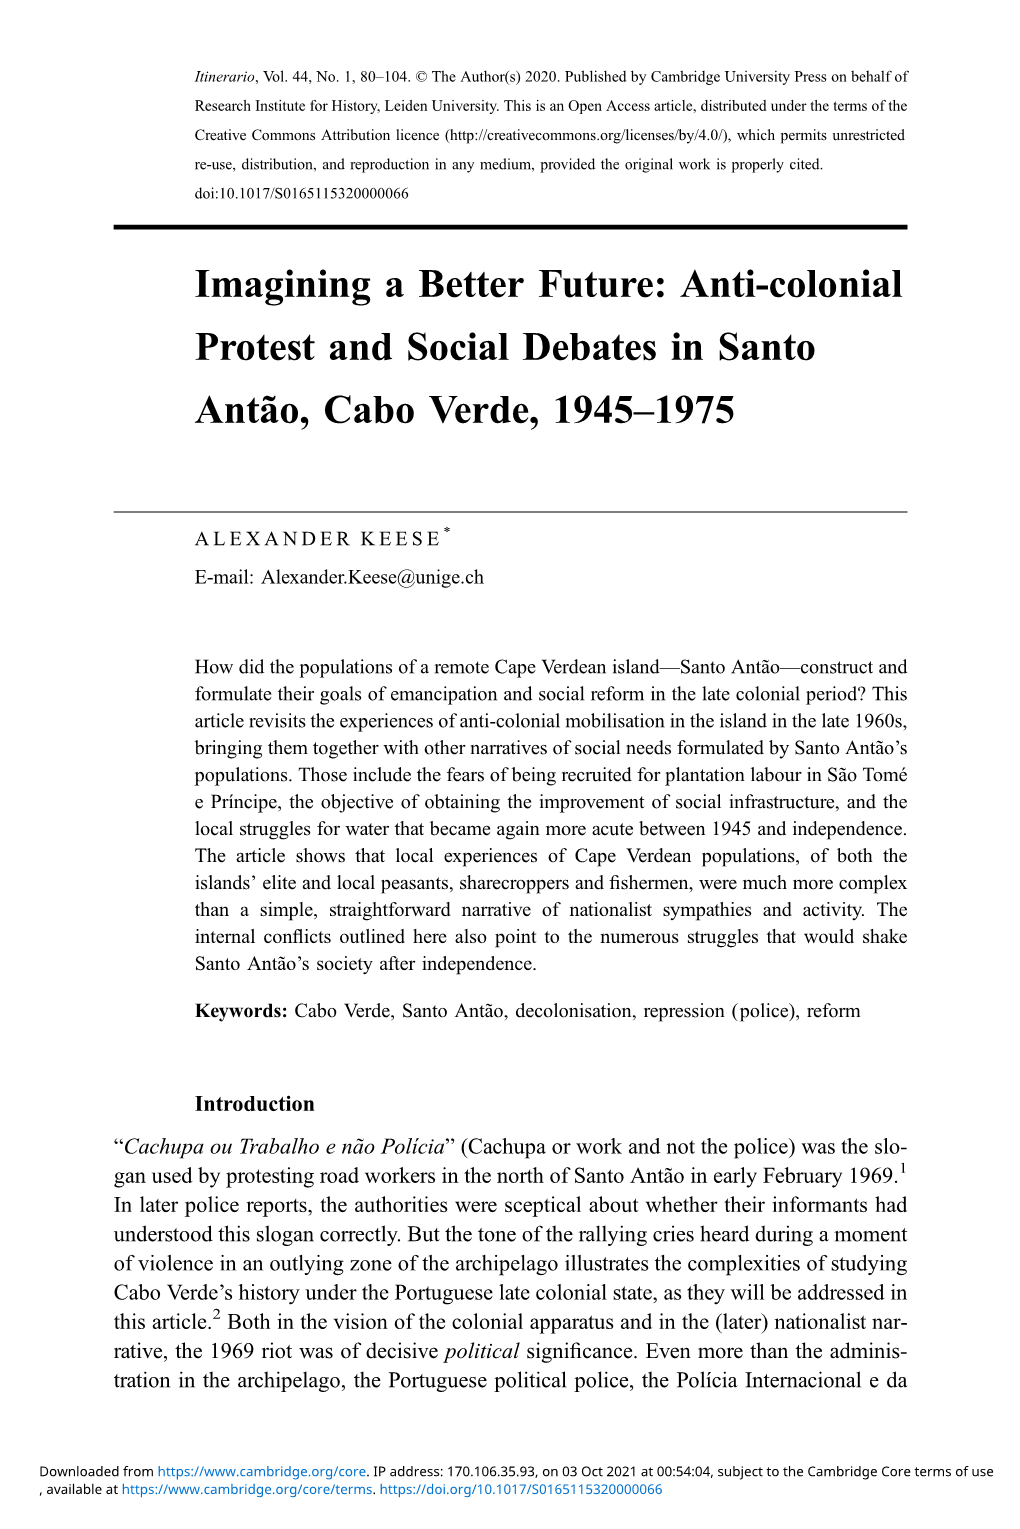 Imagining a Better Future: Anti-Colonial Protest and Social Debates in Santo Antão, Cabo Verde, 1945–1975